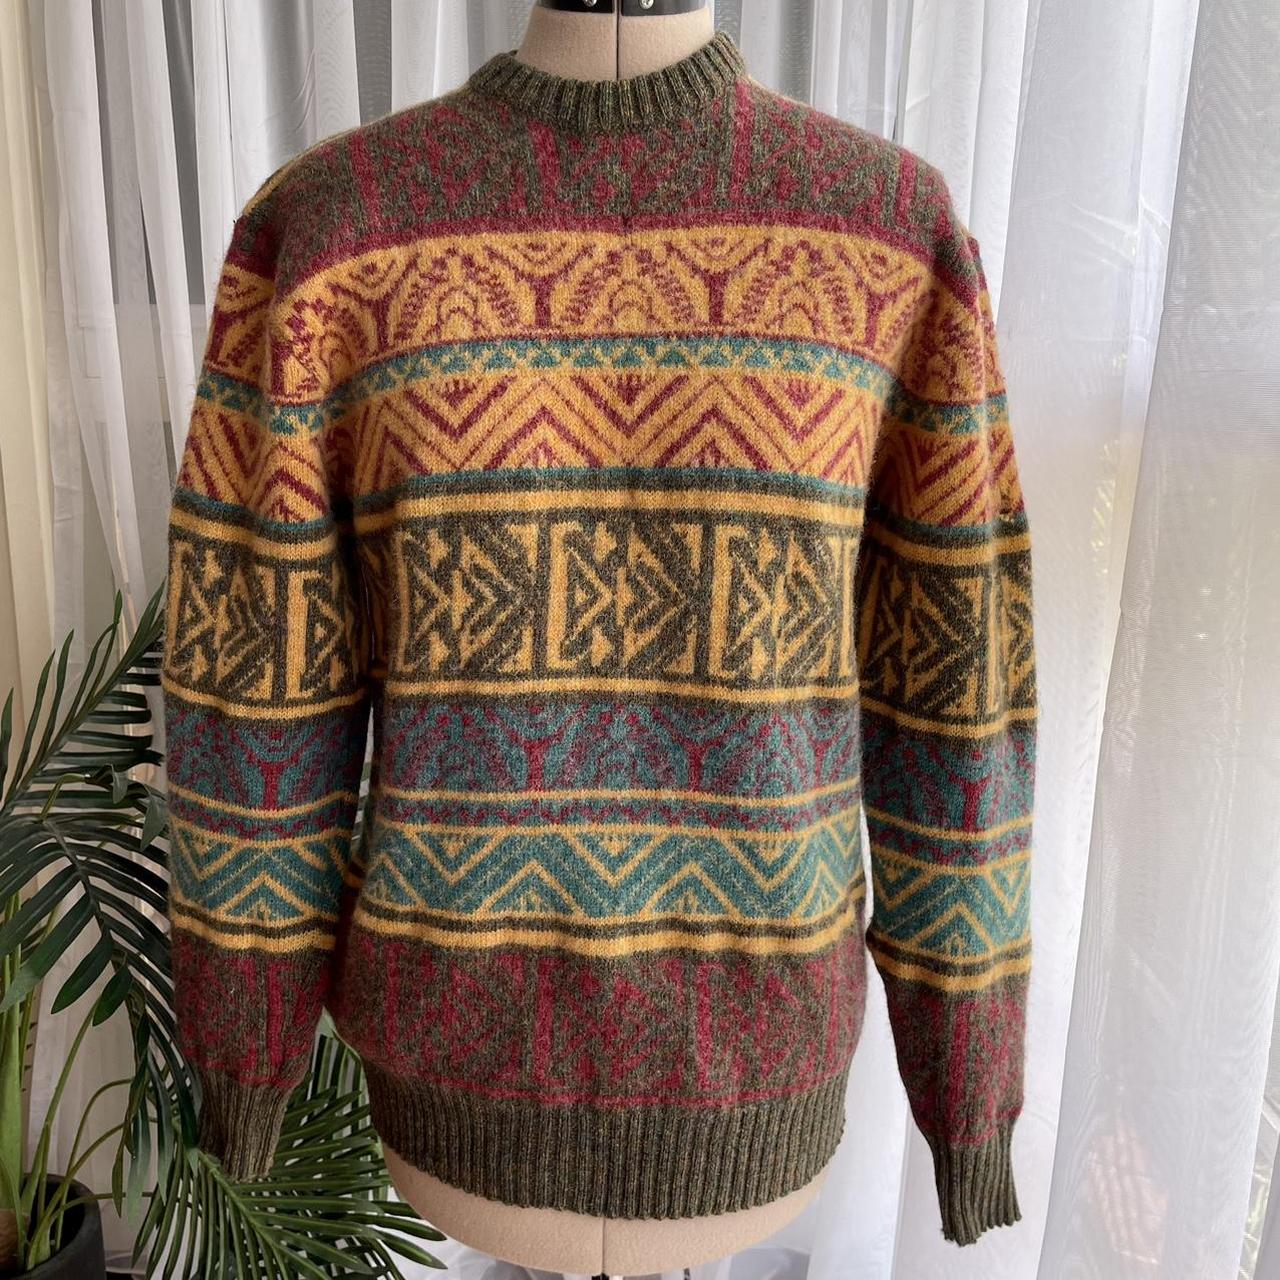 Vintage Italian made pure wool sweater , the most... - Depop